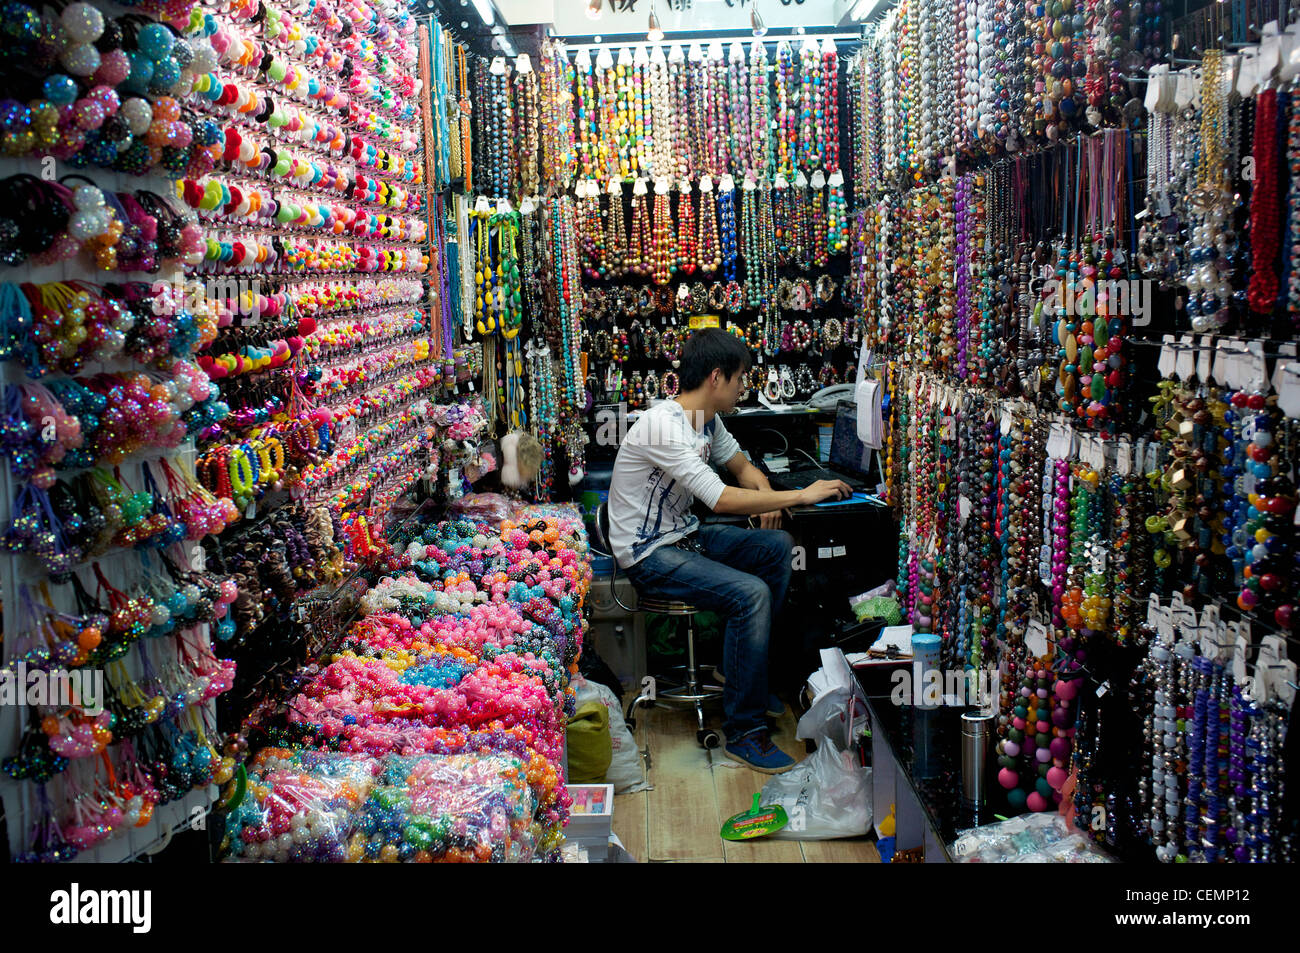 https://c8.alamy.com/comp/CEMP12/fashion-accessories-are-on-sale-in-yiwu-market-in-yiwu-zhejiang-province-CEMP12.jpg